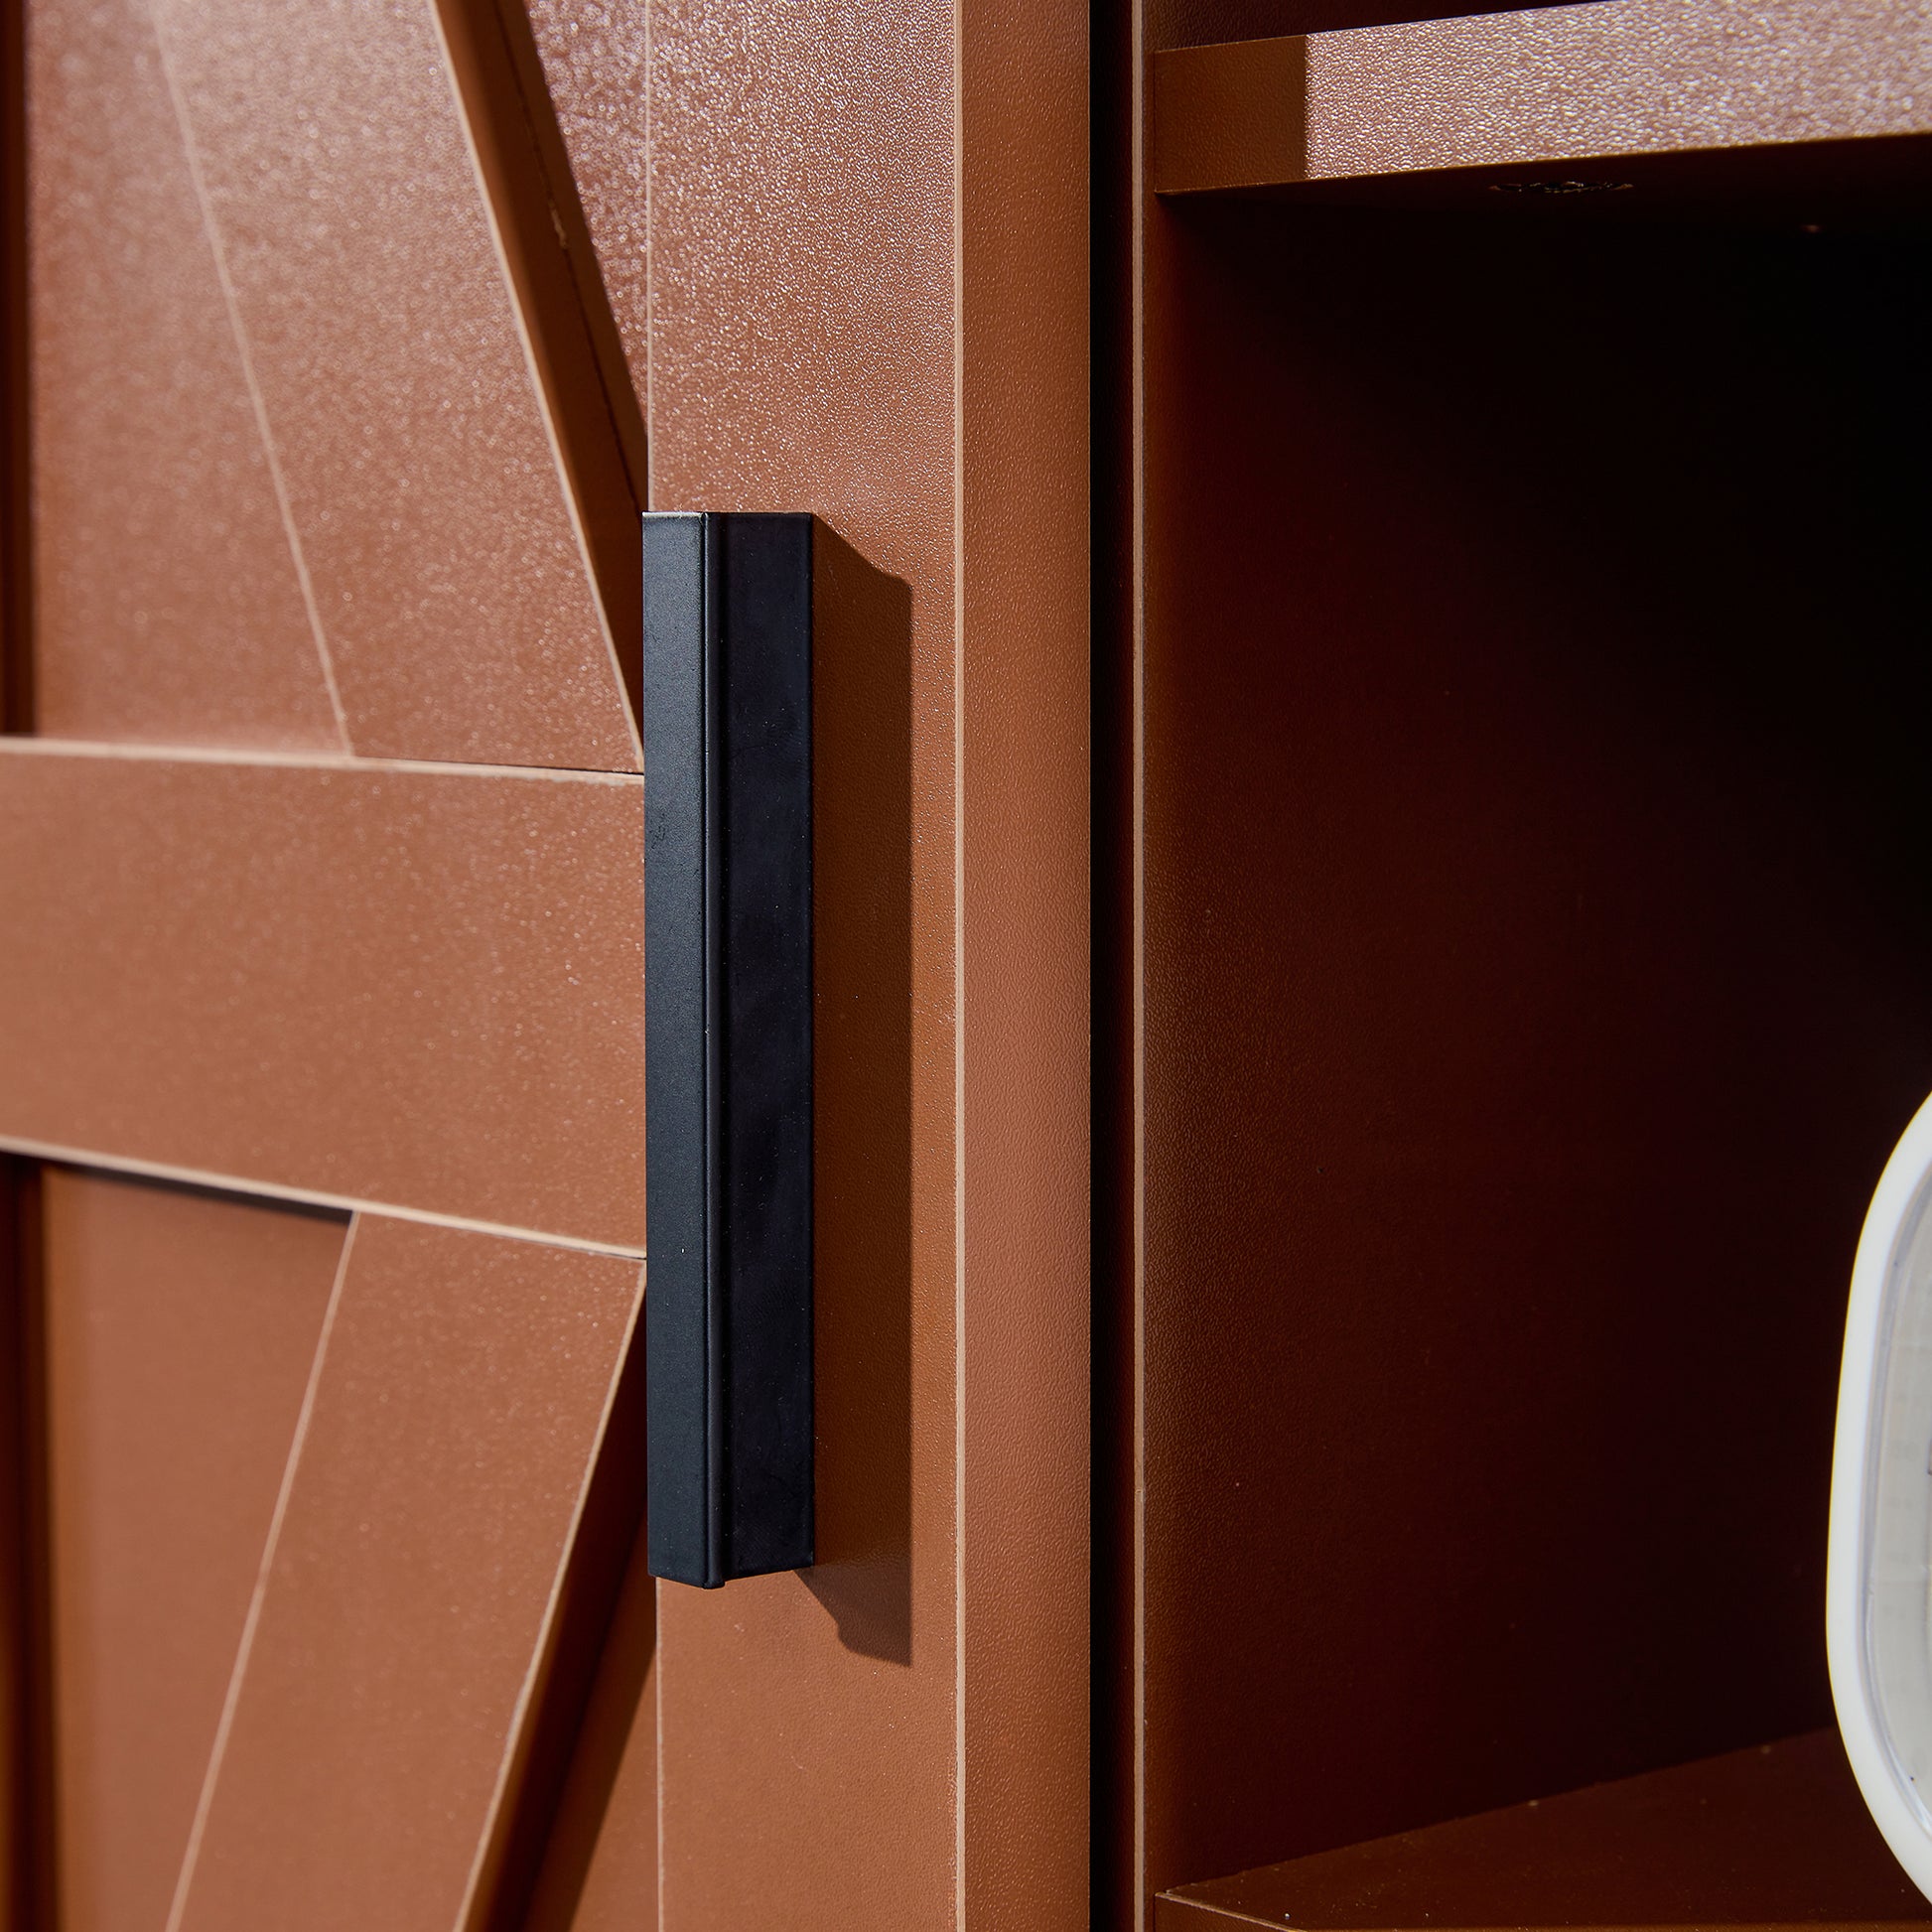 Wood wall mounted storage cabinet, 5 layer toilet espresso-mdf